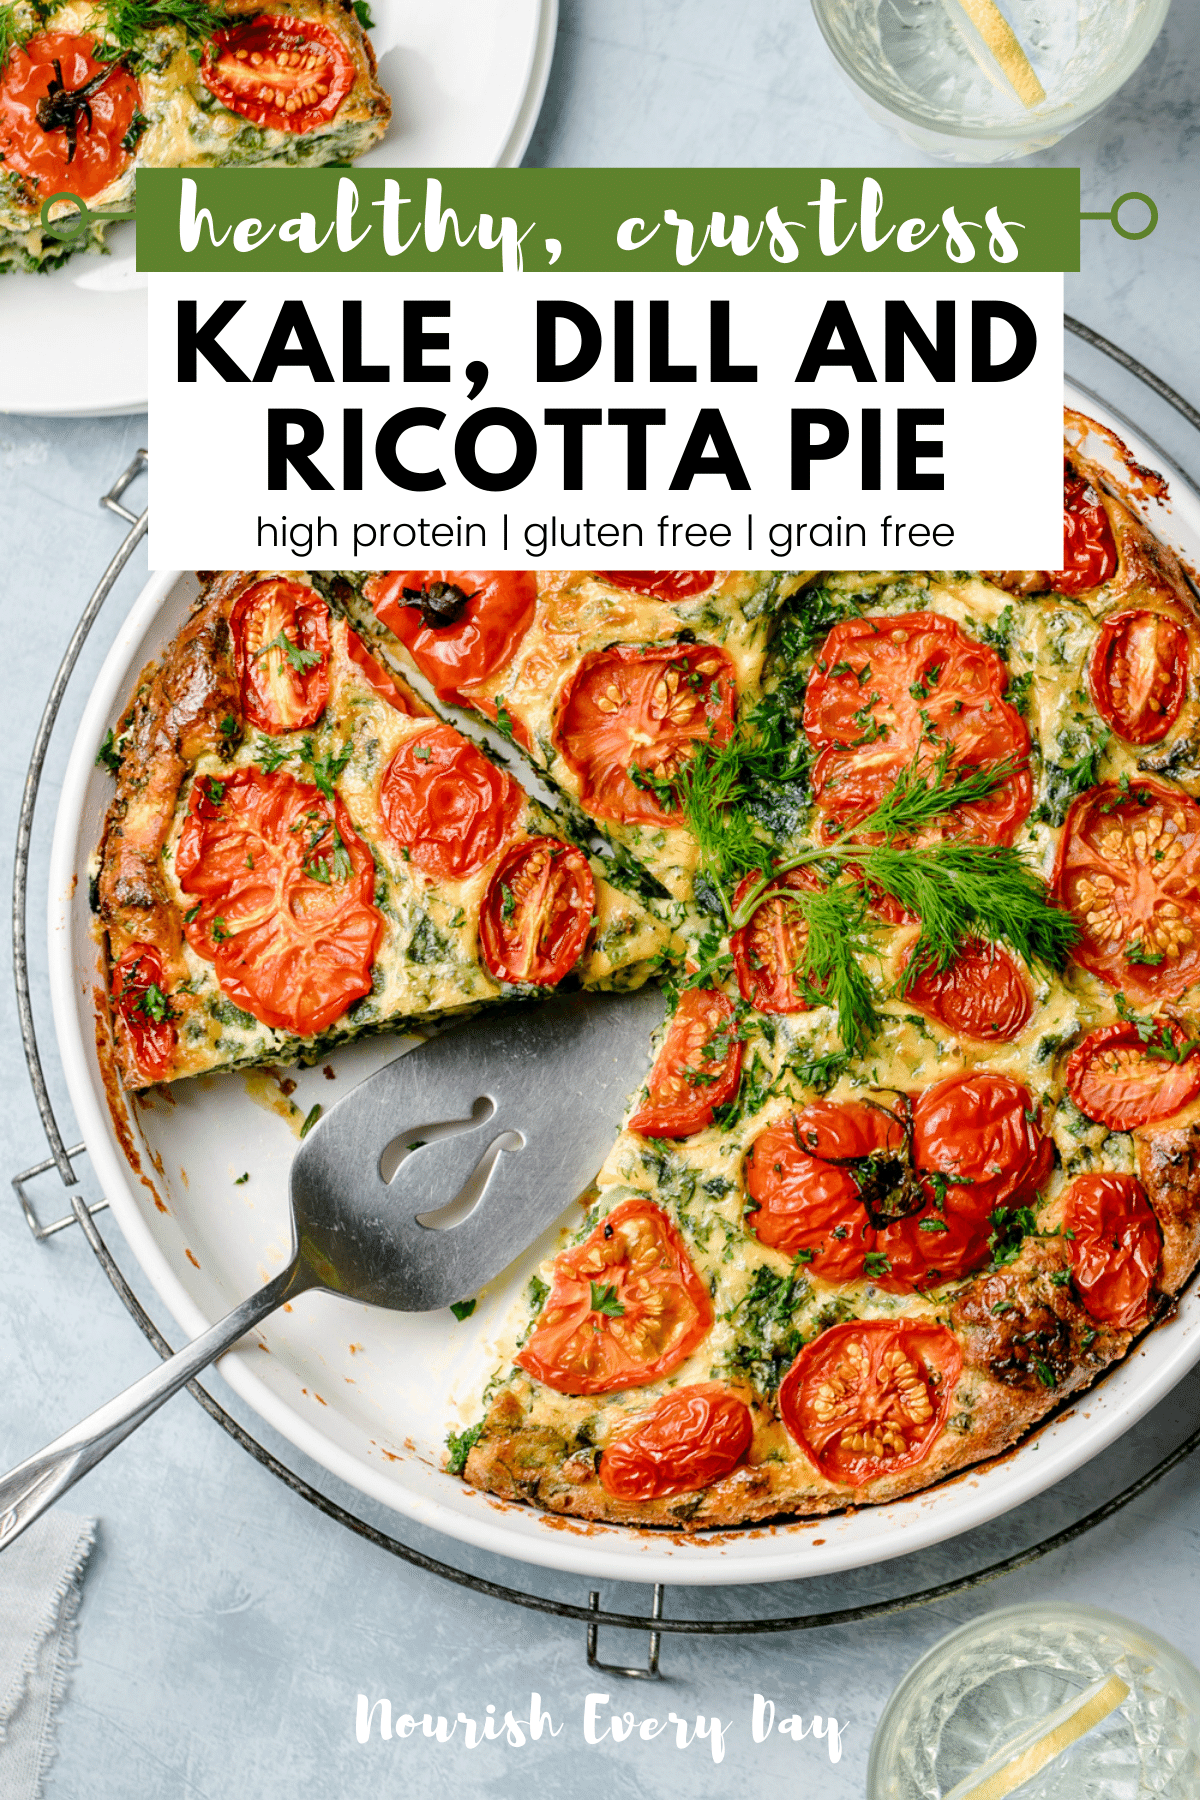 CRUSTLESS KALE, DILL AND RICOTTA PIE a delicious gluten free pie option that is a cinch to make! Using eggs, ricotta and vegetables, this crustless pie is high protein, packed with greens and perfect for a quick and healthy lunch or dinner.